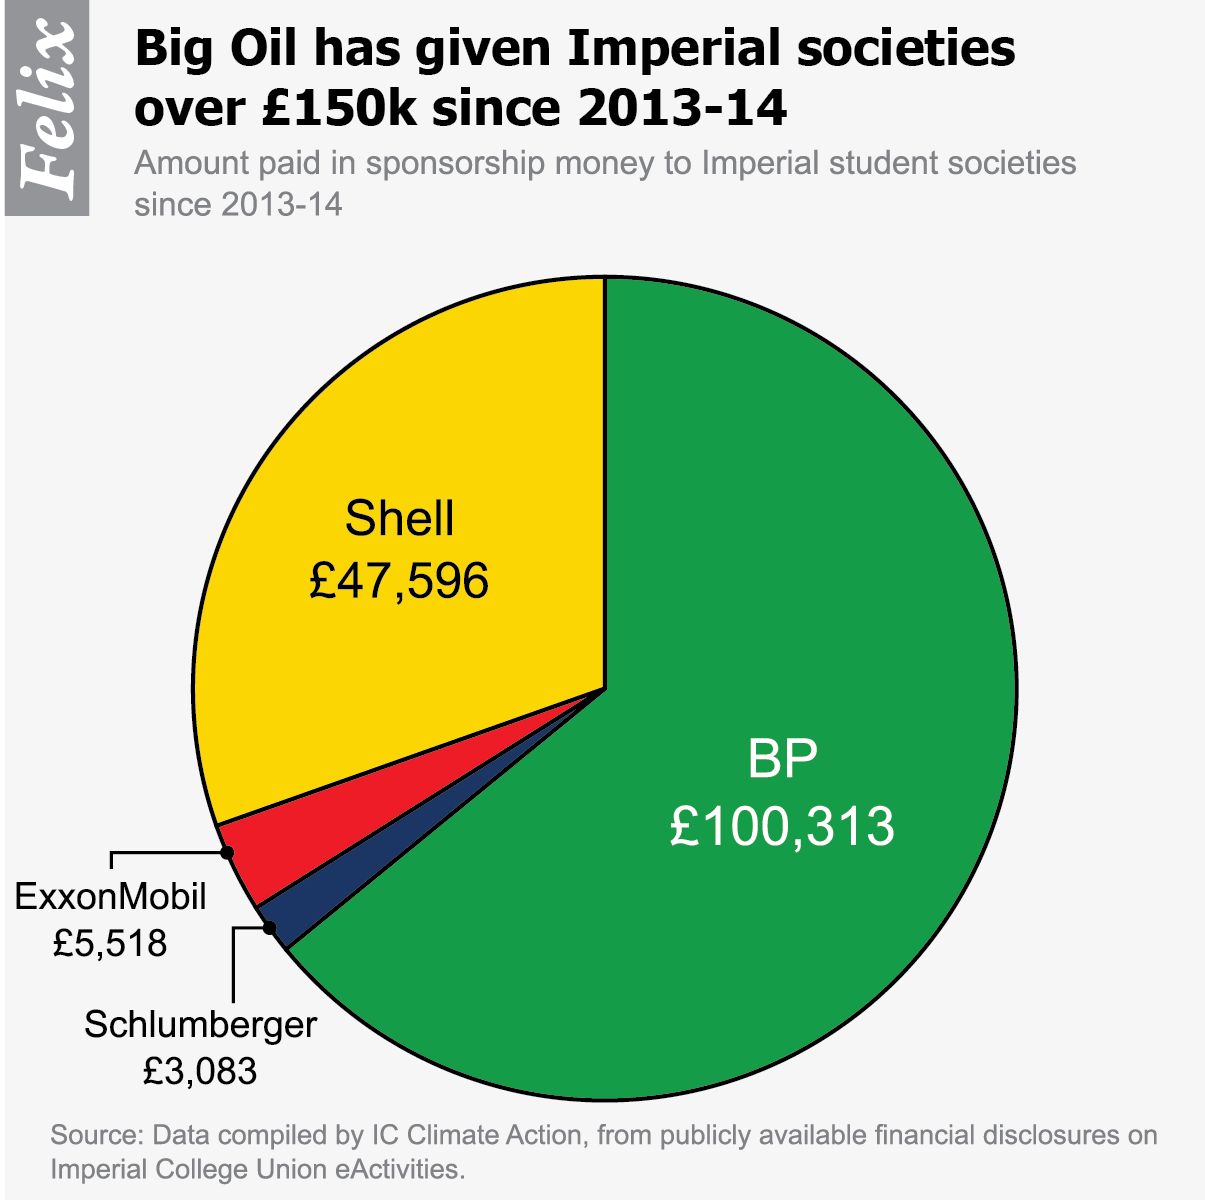 Big Oil has given Imperial over £150k since 2013-14